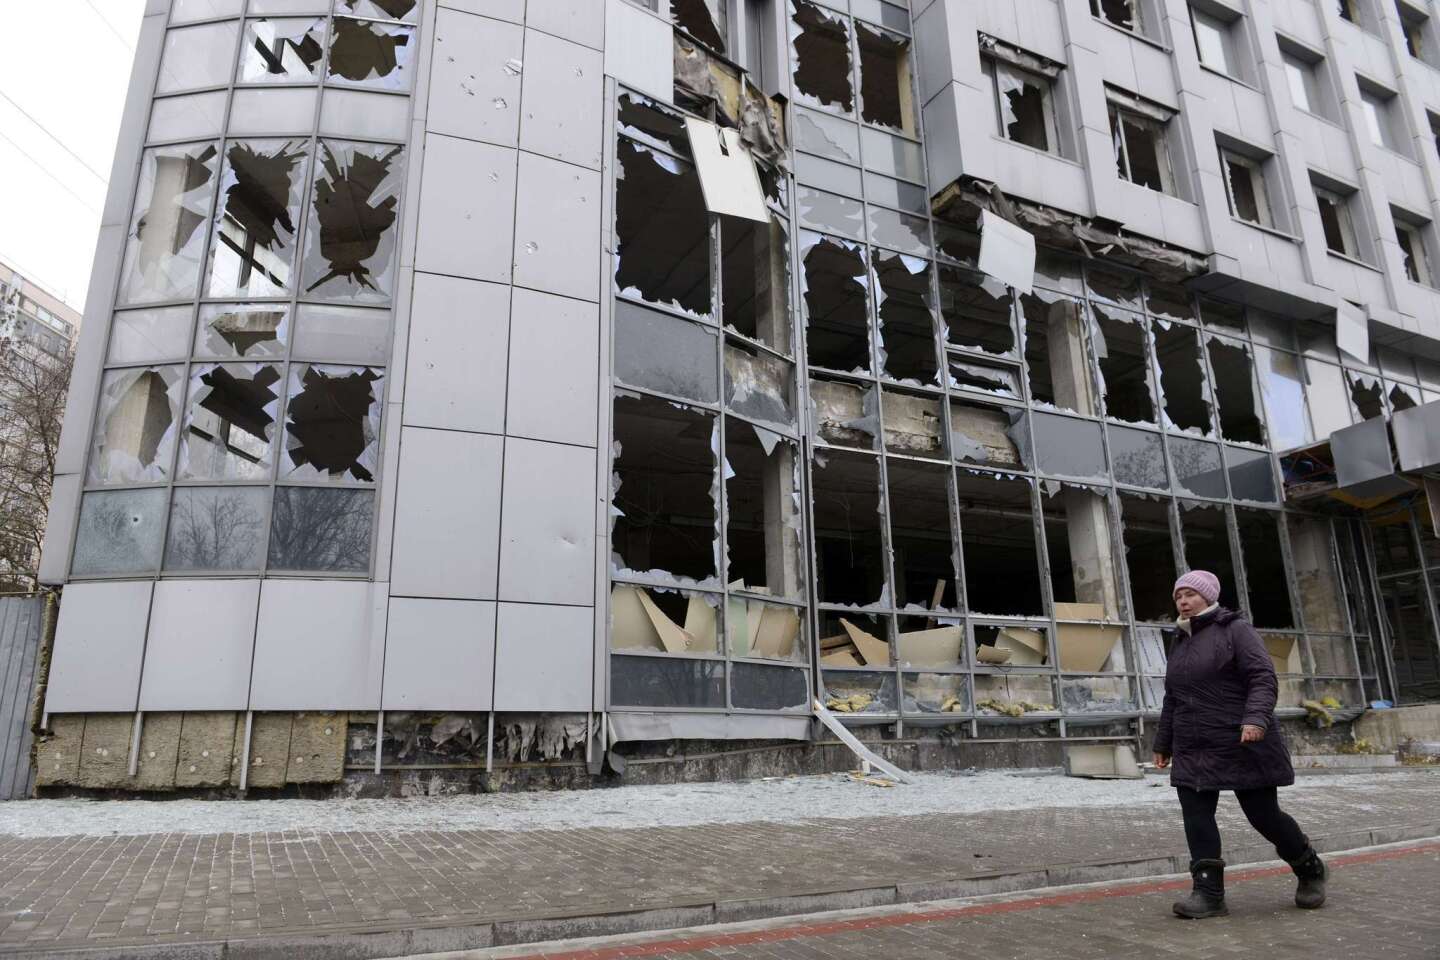 A lone pedestrian passes through a once-bustling area of Donetsk on Nov. 13. Commercial buildings, government offices and thousands of homes have been destroyed in the city in seven months of fighting between separatists and Ukrainian troops.